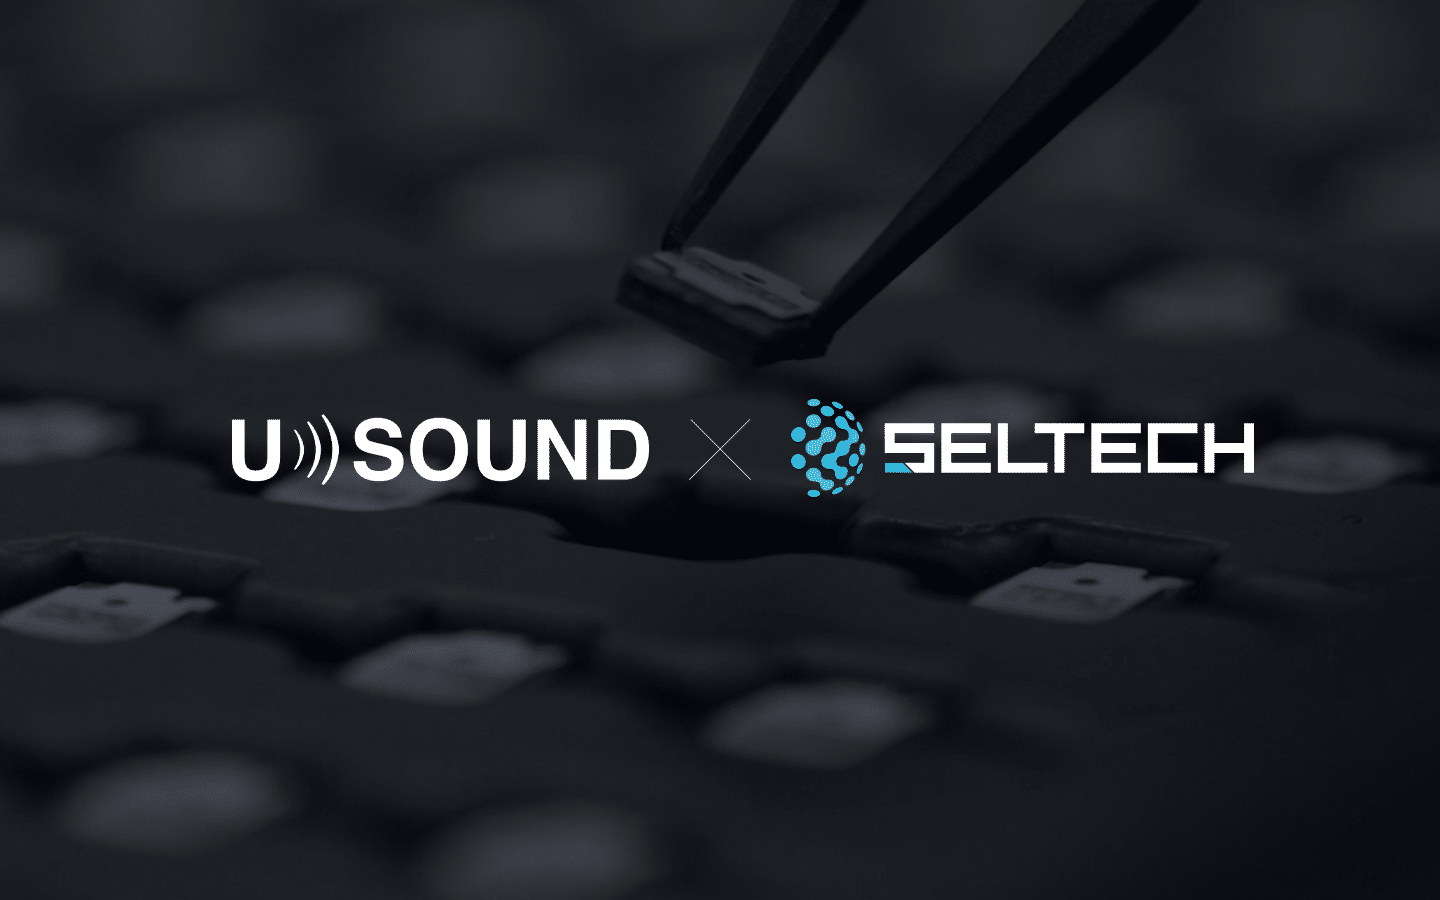 USound and seltech logos announcing cooperation